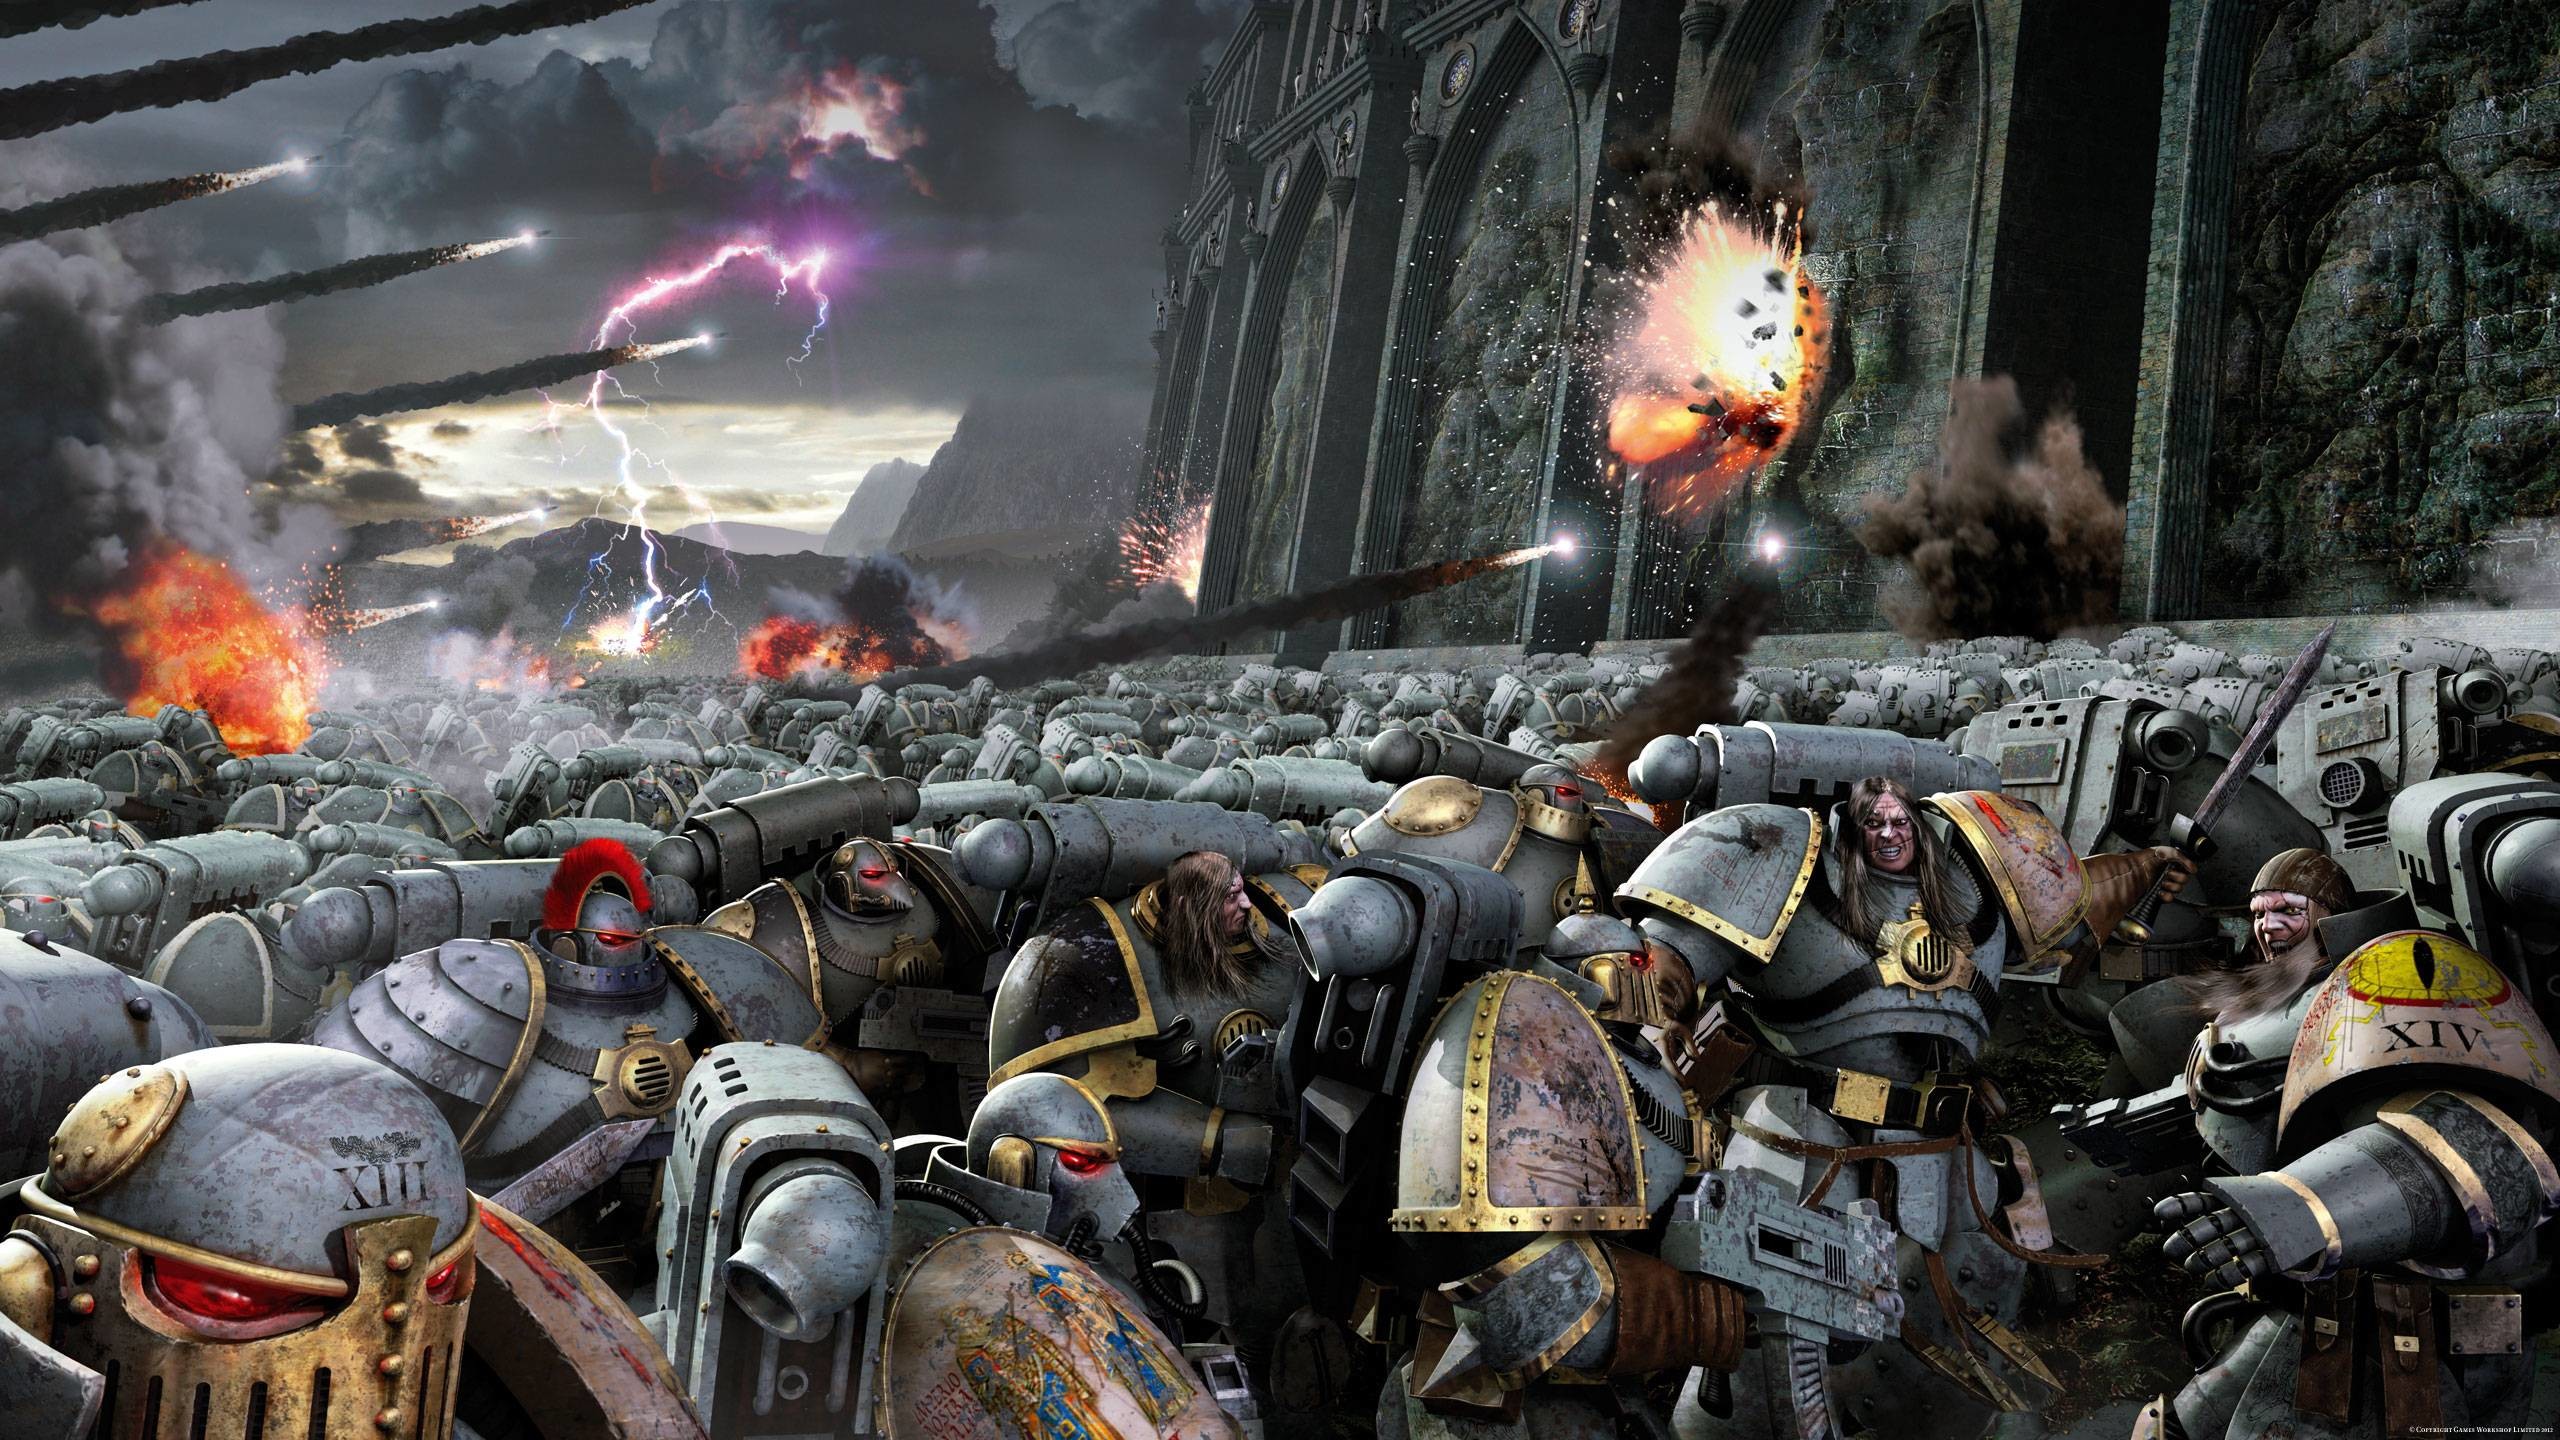 830 Warhammer HD Wallpapers and Backgrounds